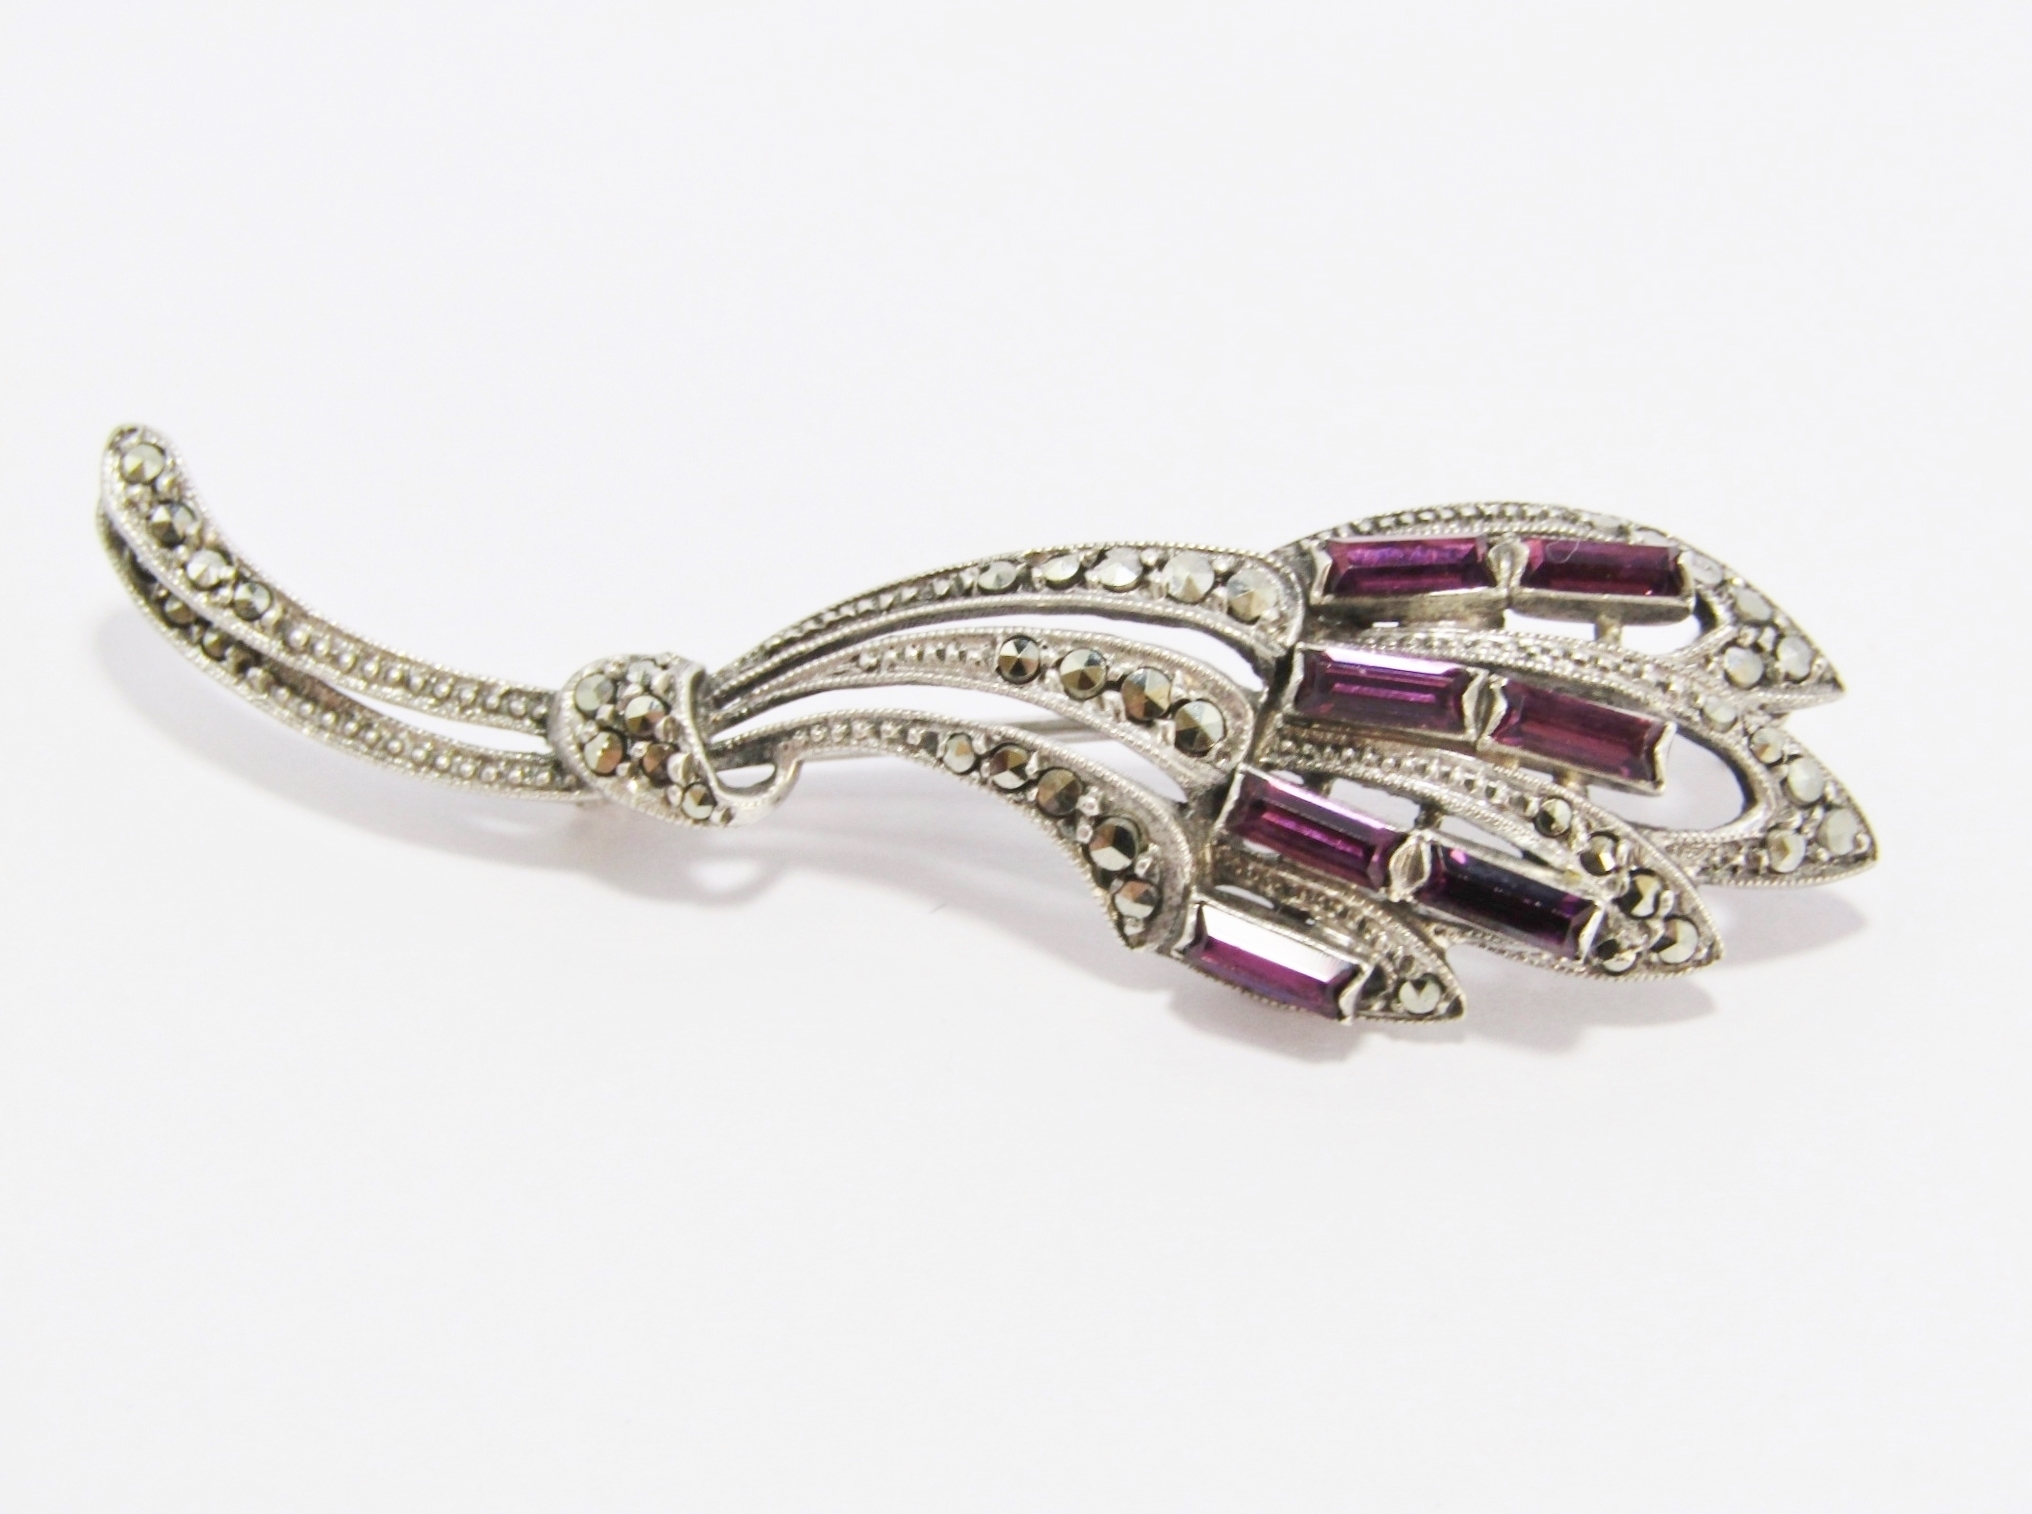 A Gorgeous Vintage Marcasite Brooch With Purple Paste Stones in Sterling Silver.